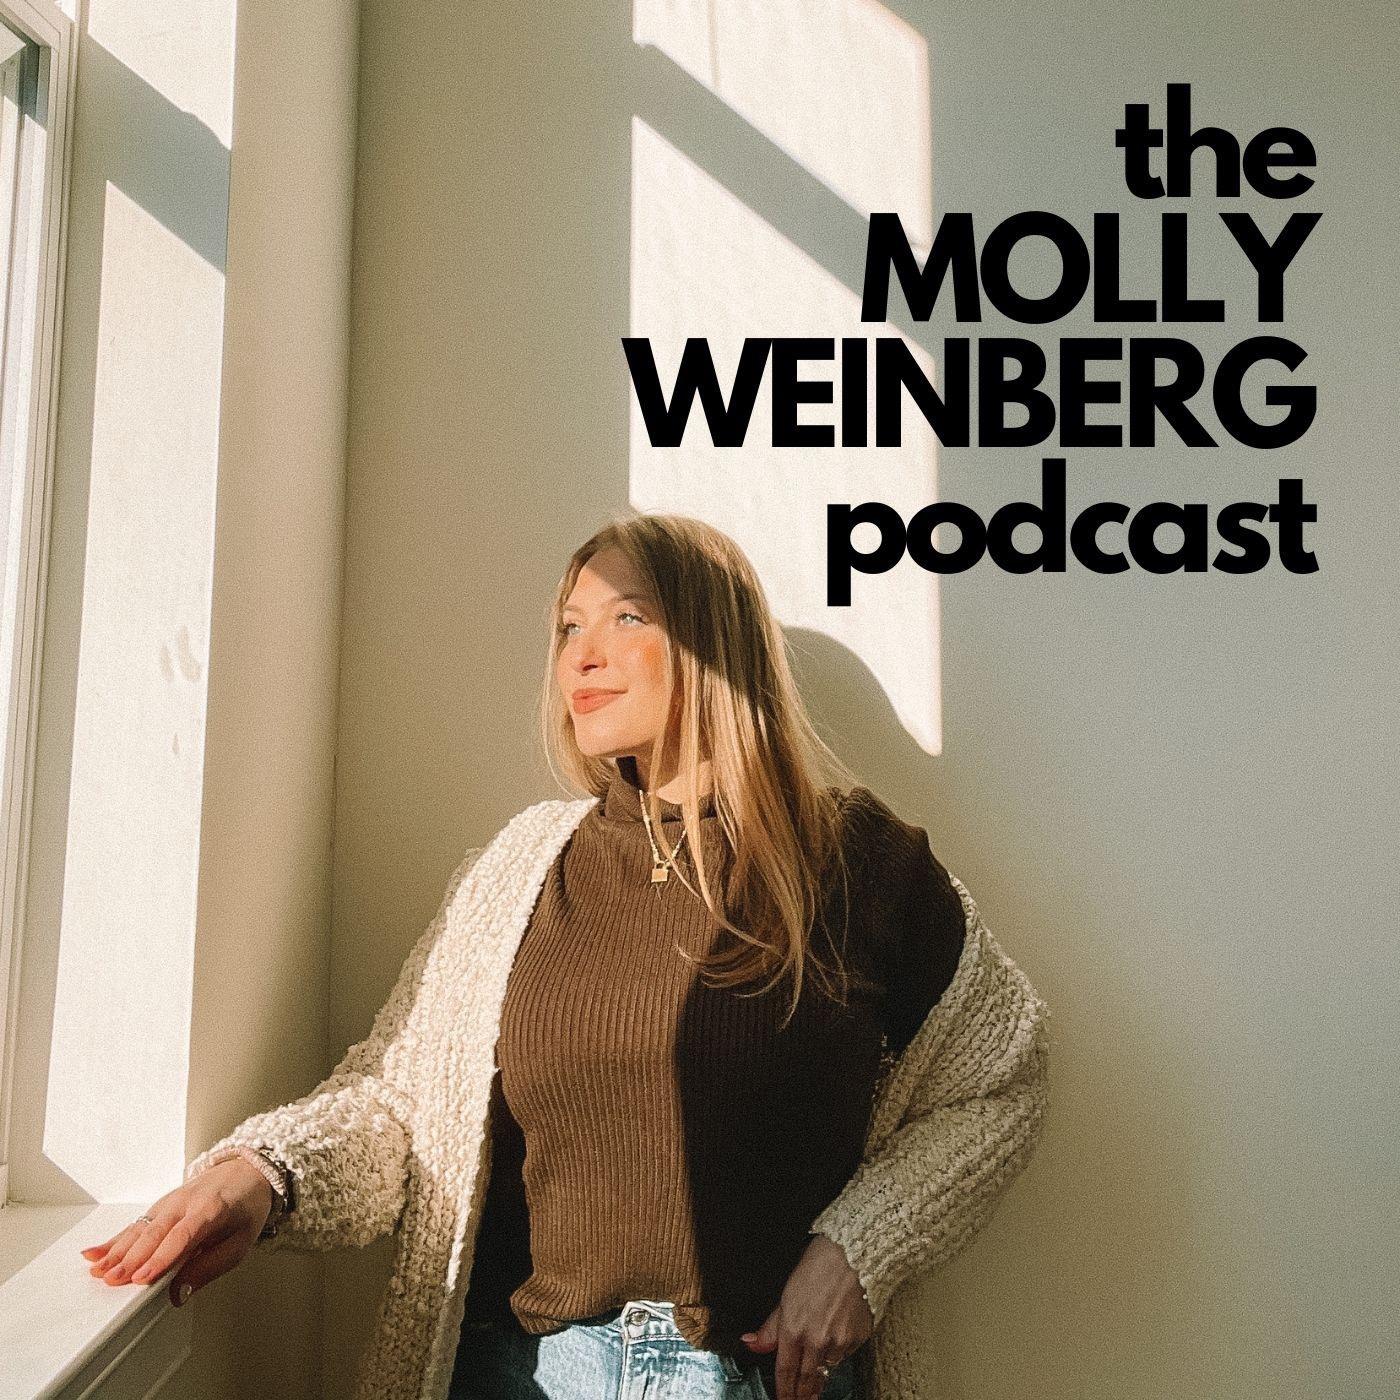 The Molly Weinberg Podcast